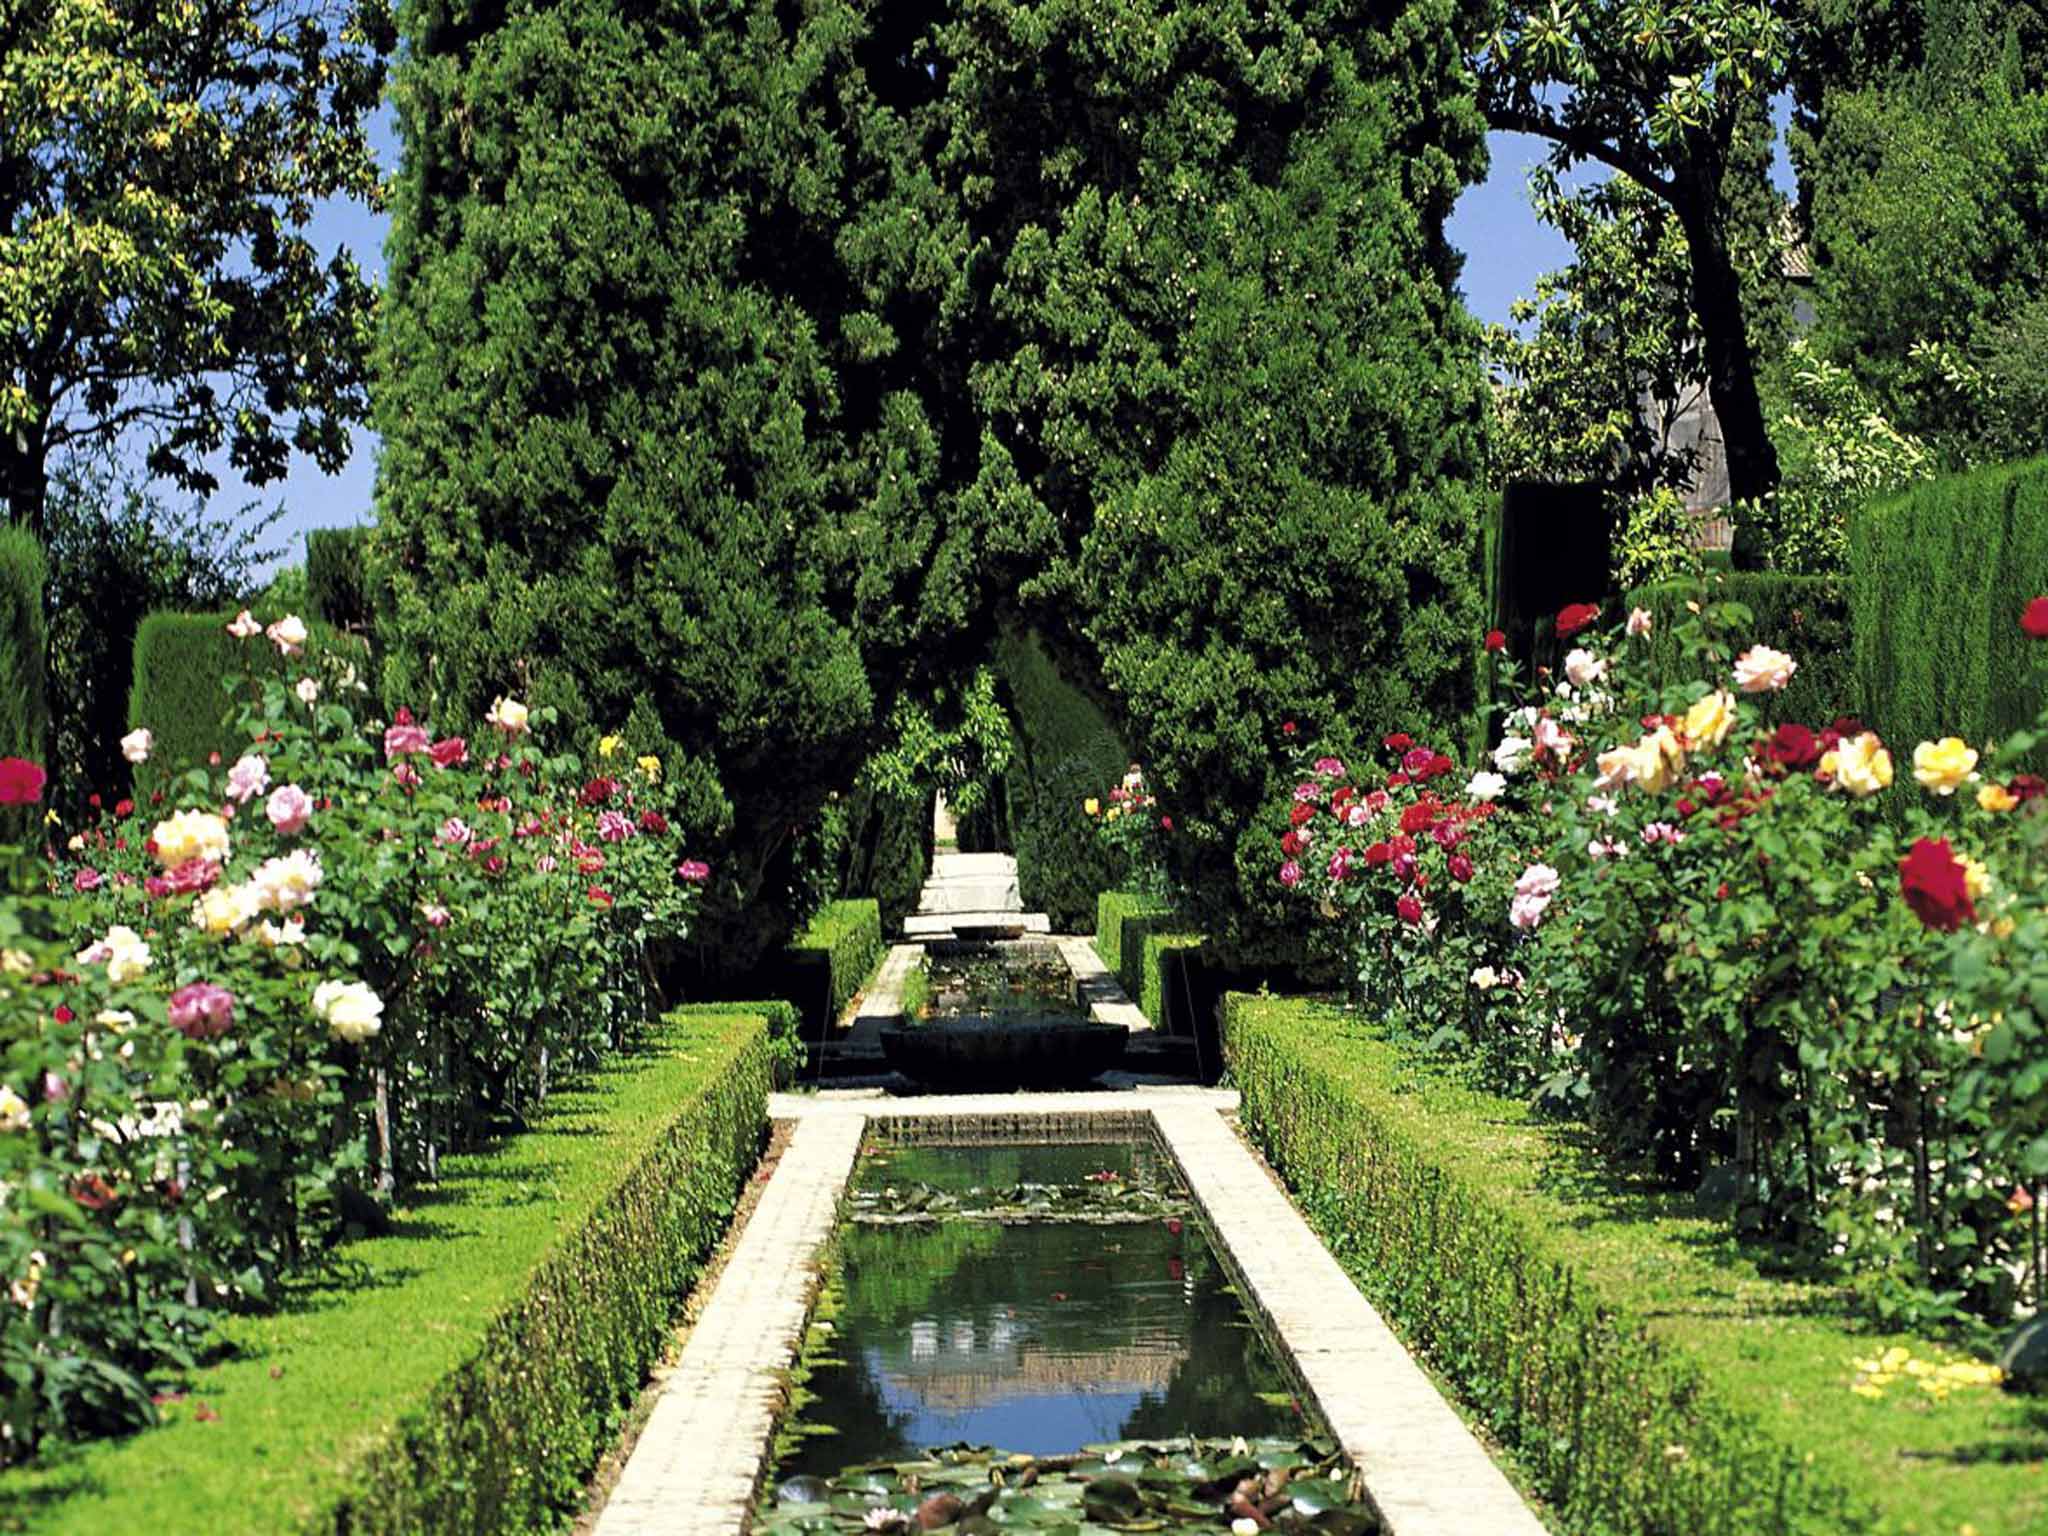 You don't need to be a garden lover to be impressed by the grandeur of the Alhambra